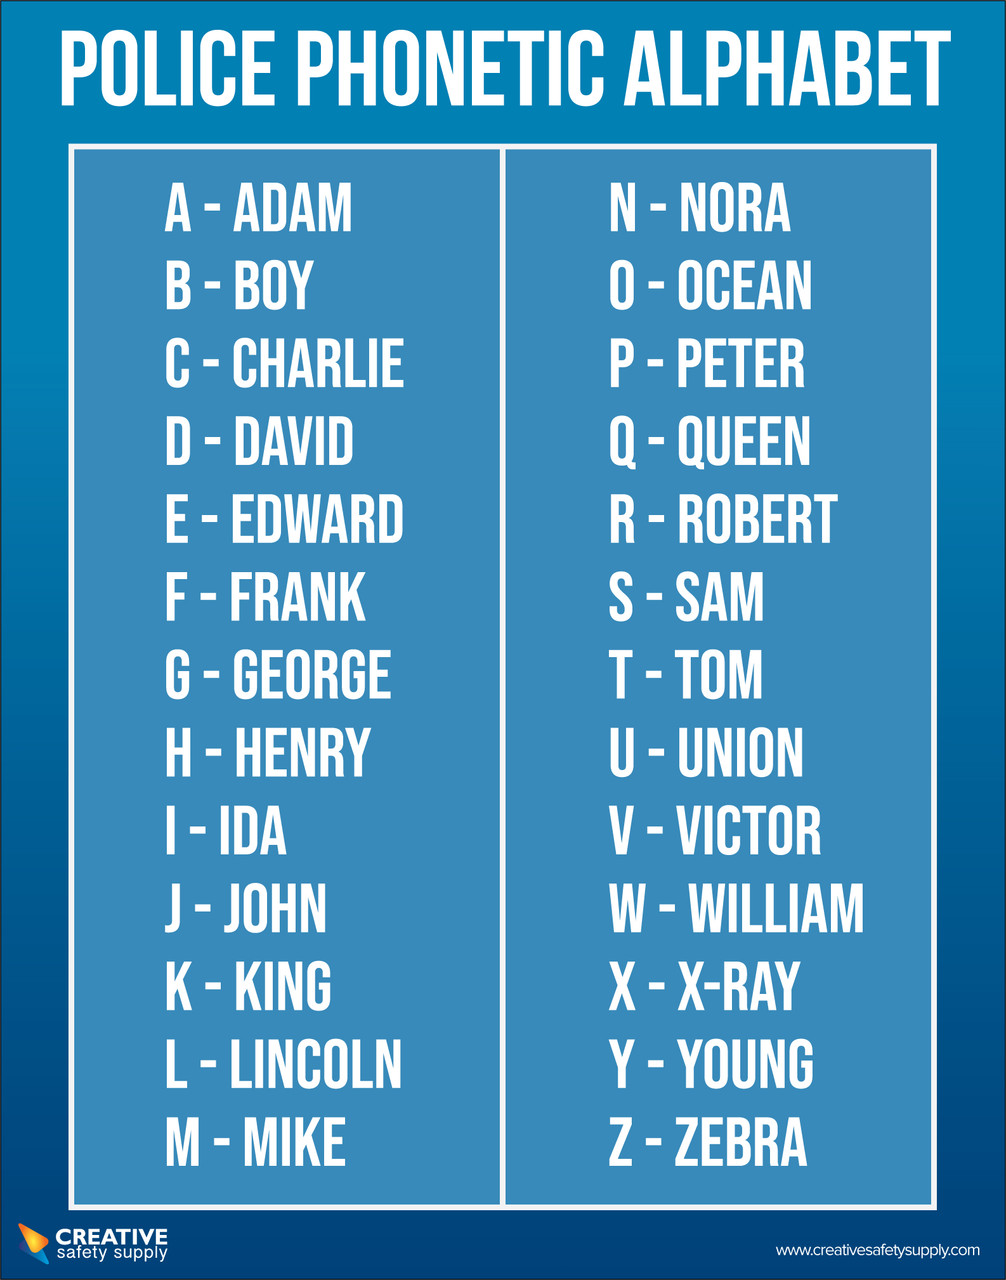 Nypd Police Phonetic Alphabet The Phonetic Alphabet Is Used By Police ...